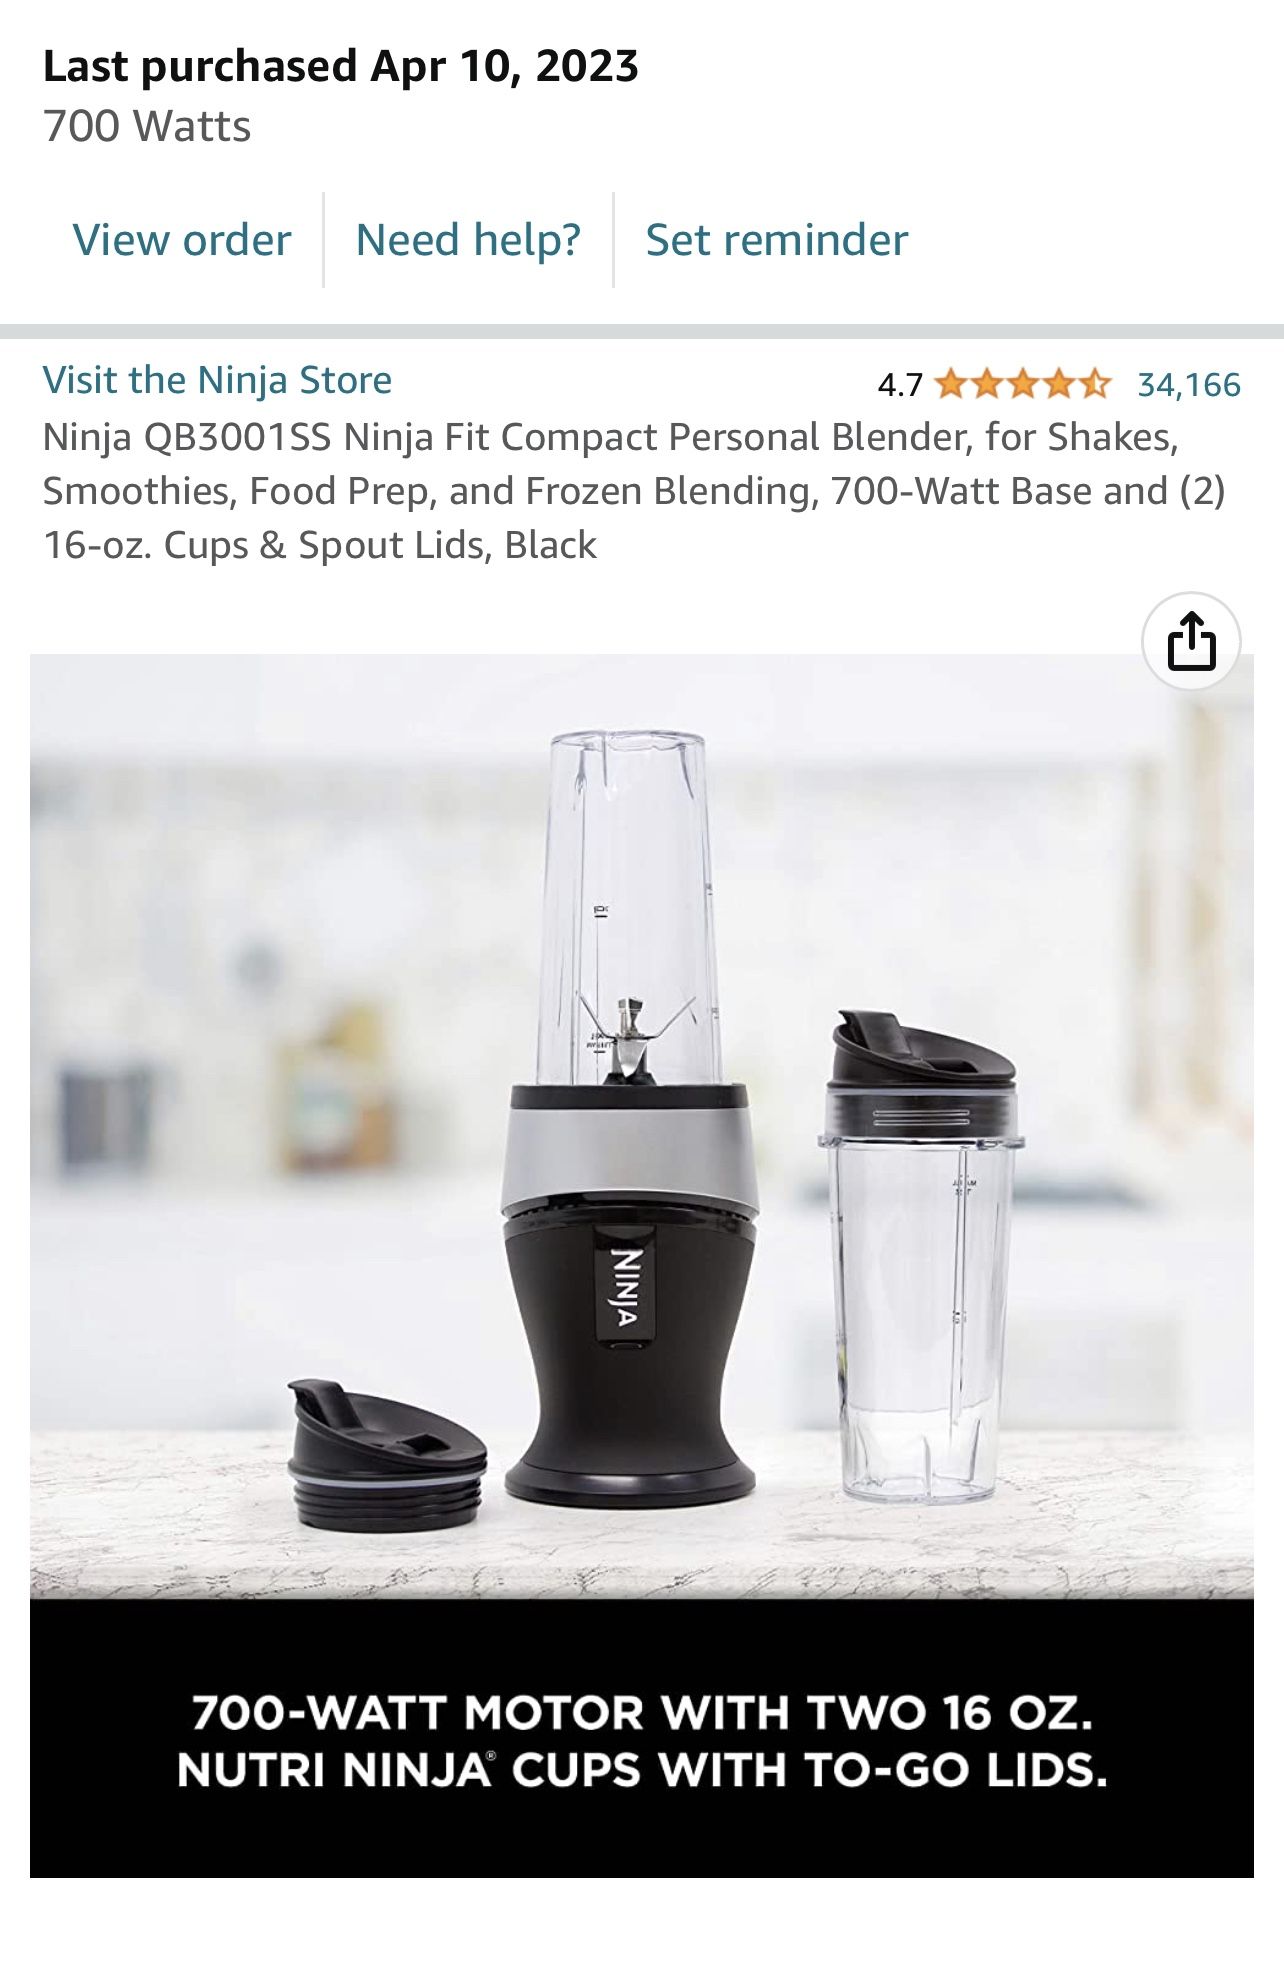 Ninja QB3001SS Ninja Fit Compact Personal Blender, for Shakes, Smoothies,  Food Prep, and Frozen Blending, 700-Watt Base and (2) 16-oz. Cups & Spout  Lids, Black in 2023